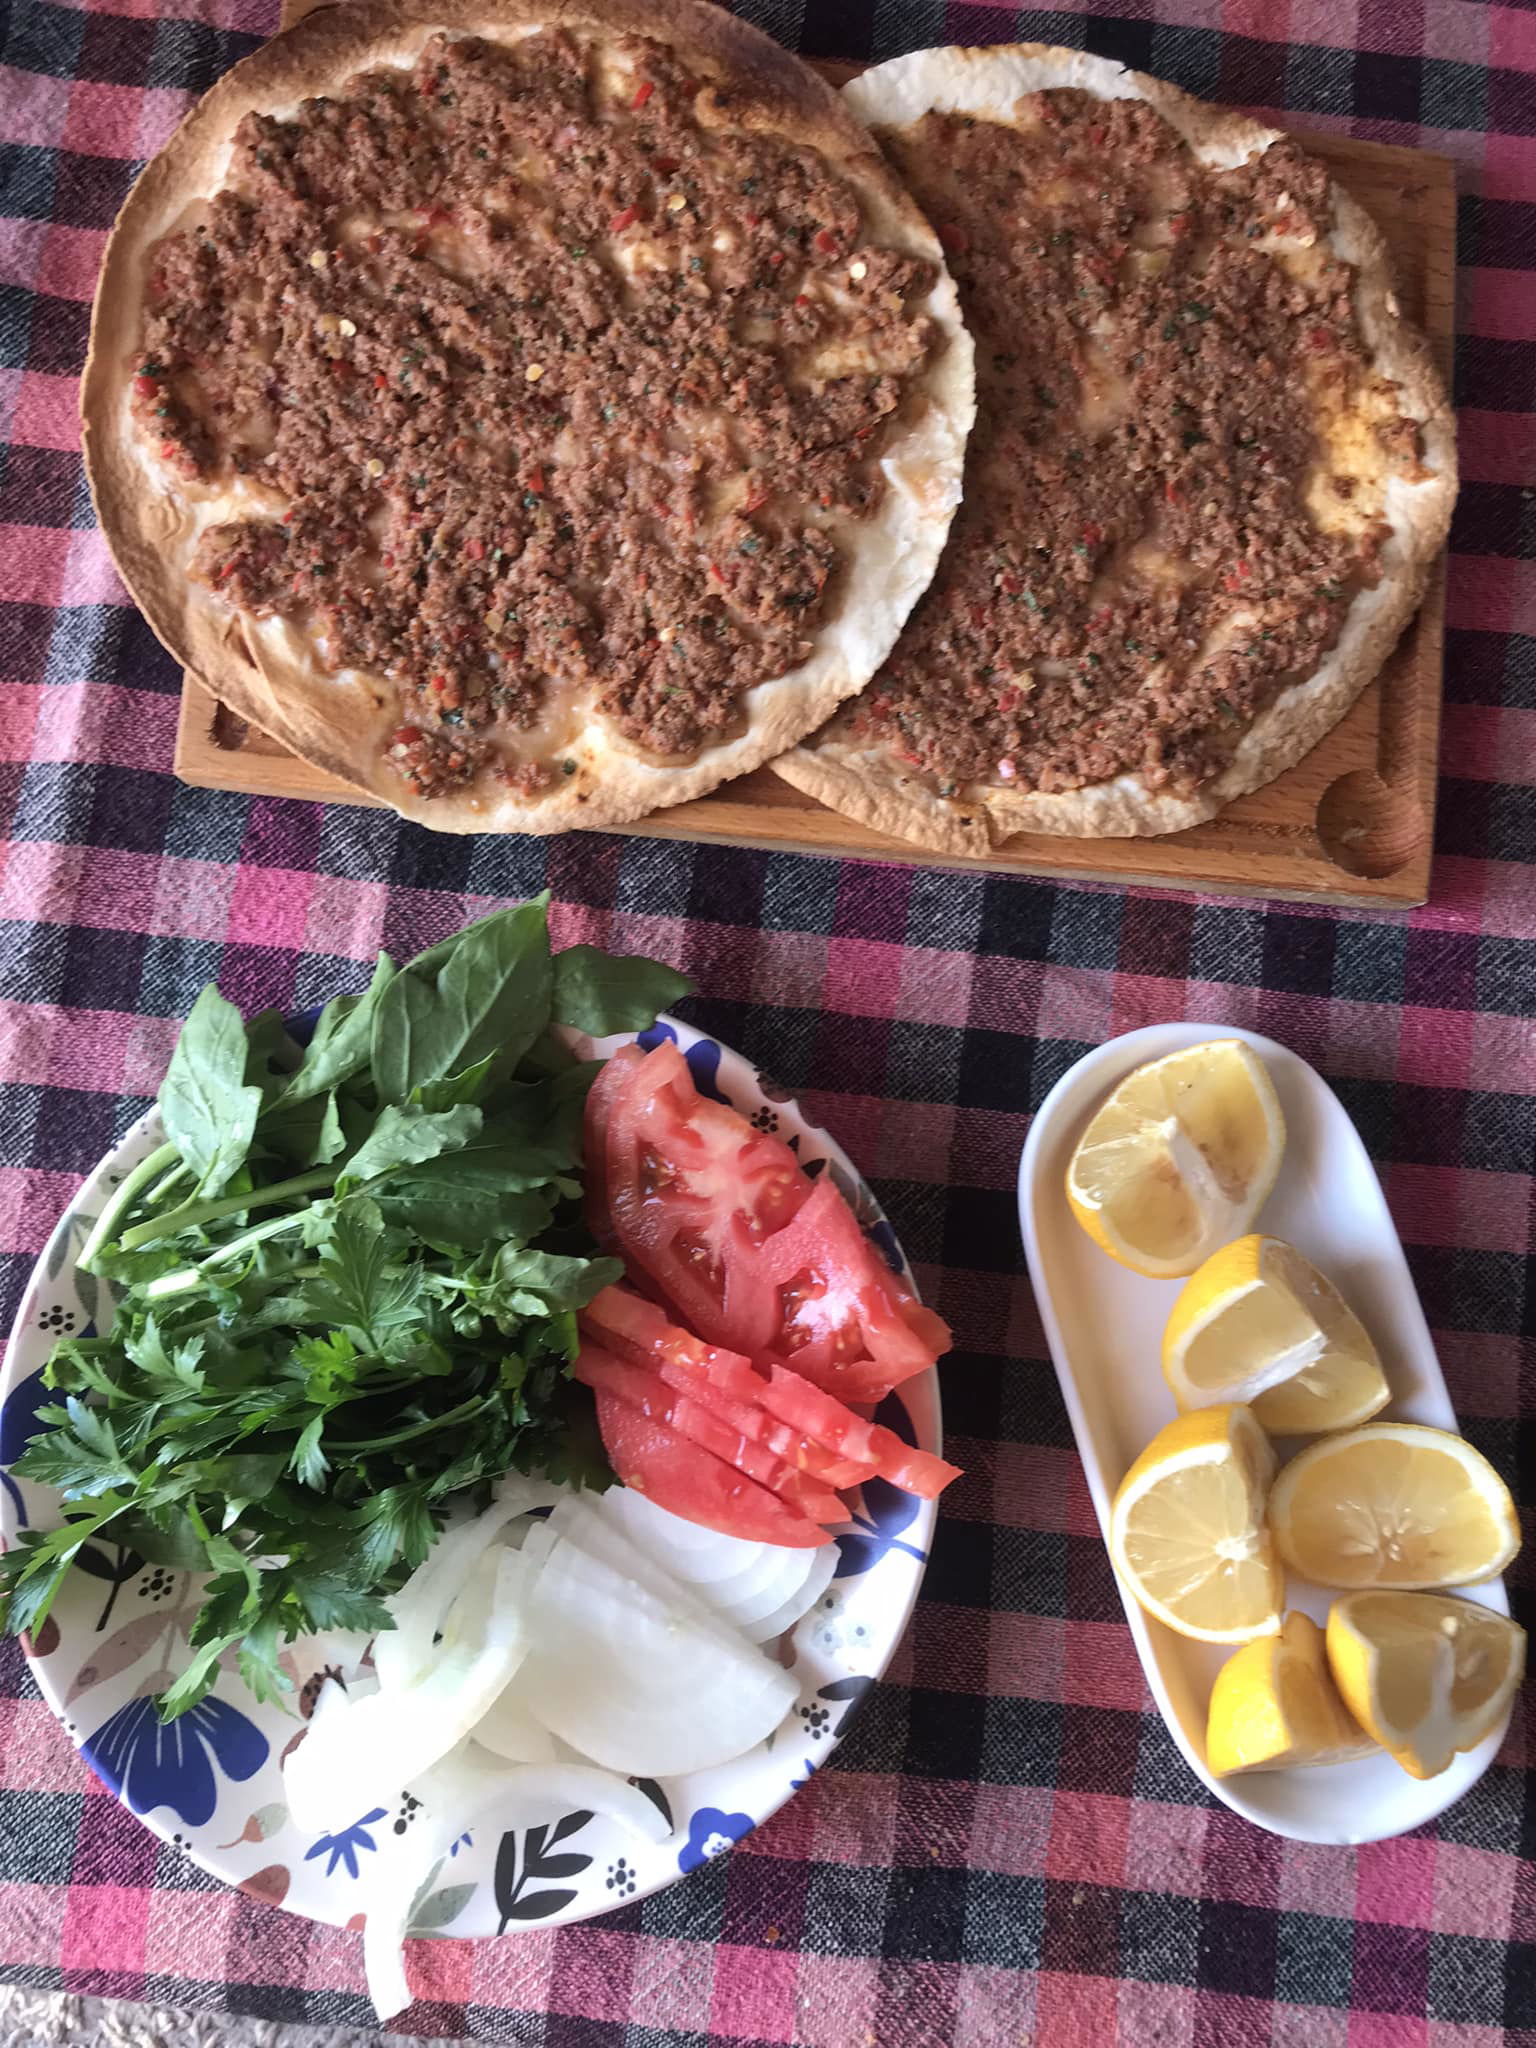 Two Lahmacun with a minced meat topping on a wooden board, alongside a plate of herbs, onions, and tomato slices, and a separate dish with lemon wedges, all set on a checkered tablecloth.